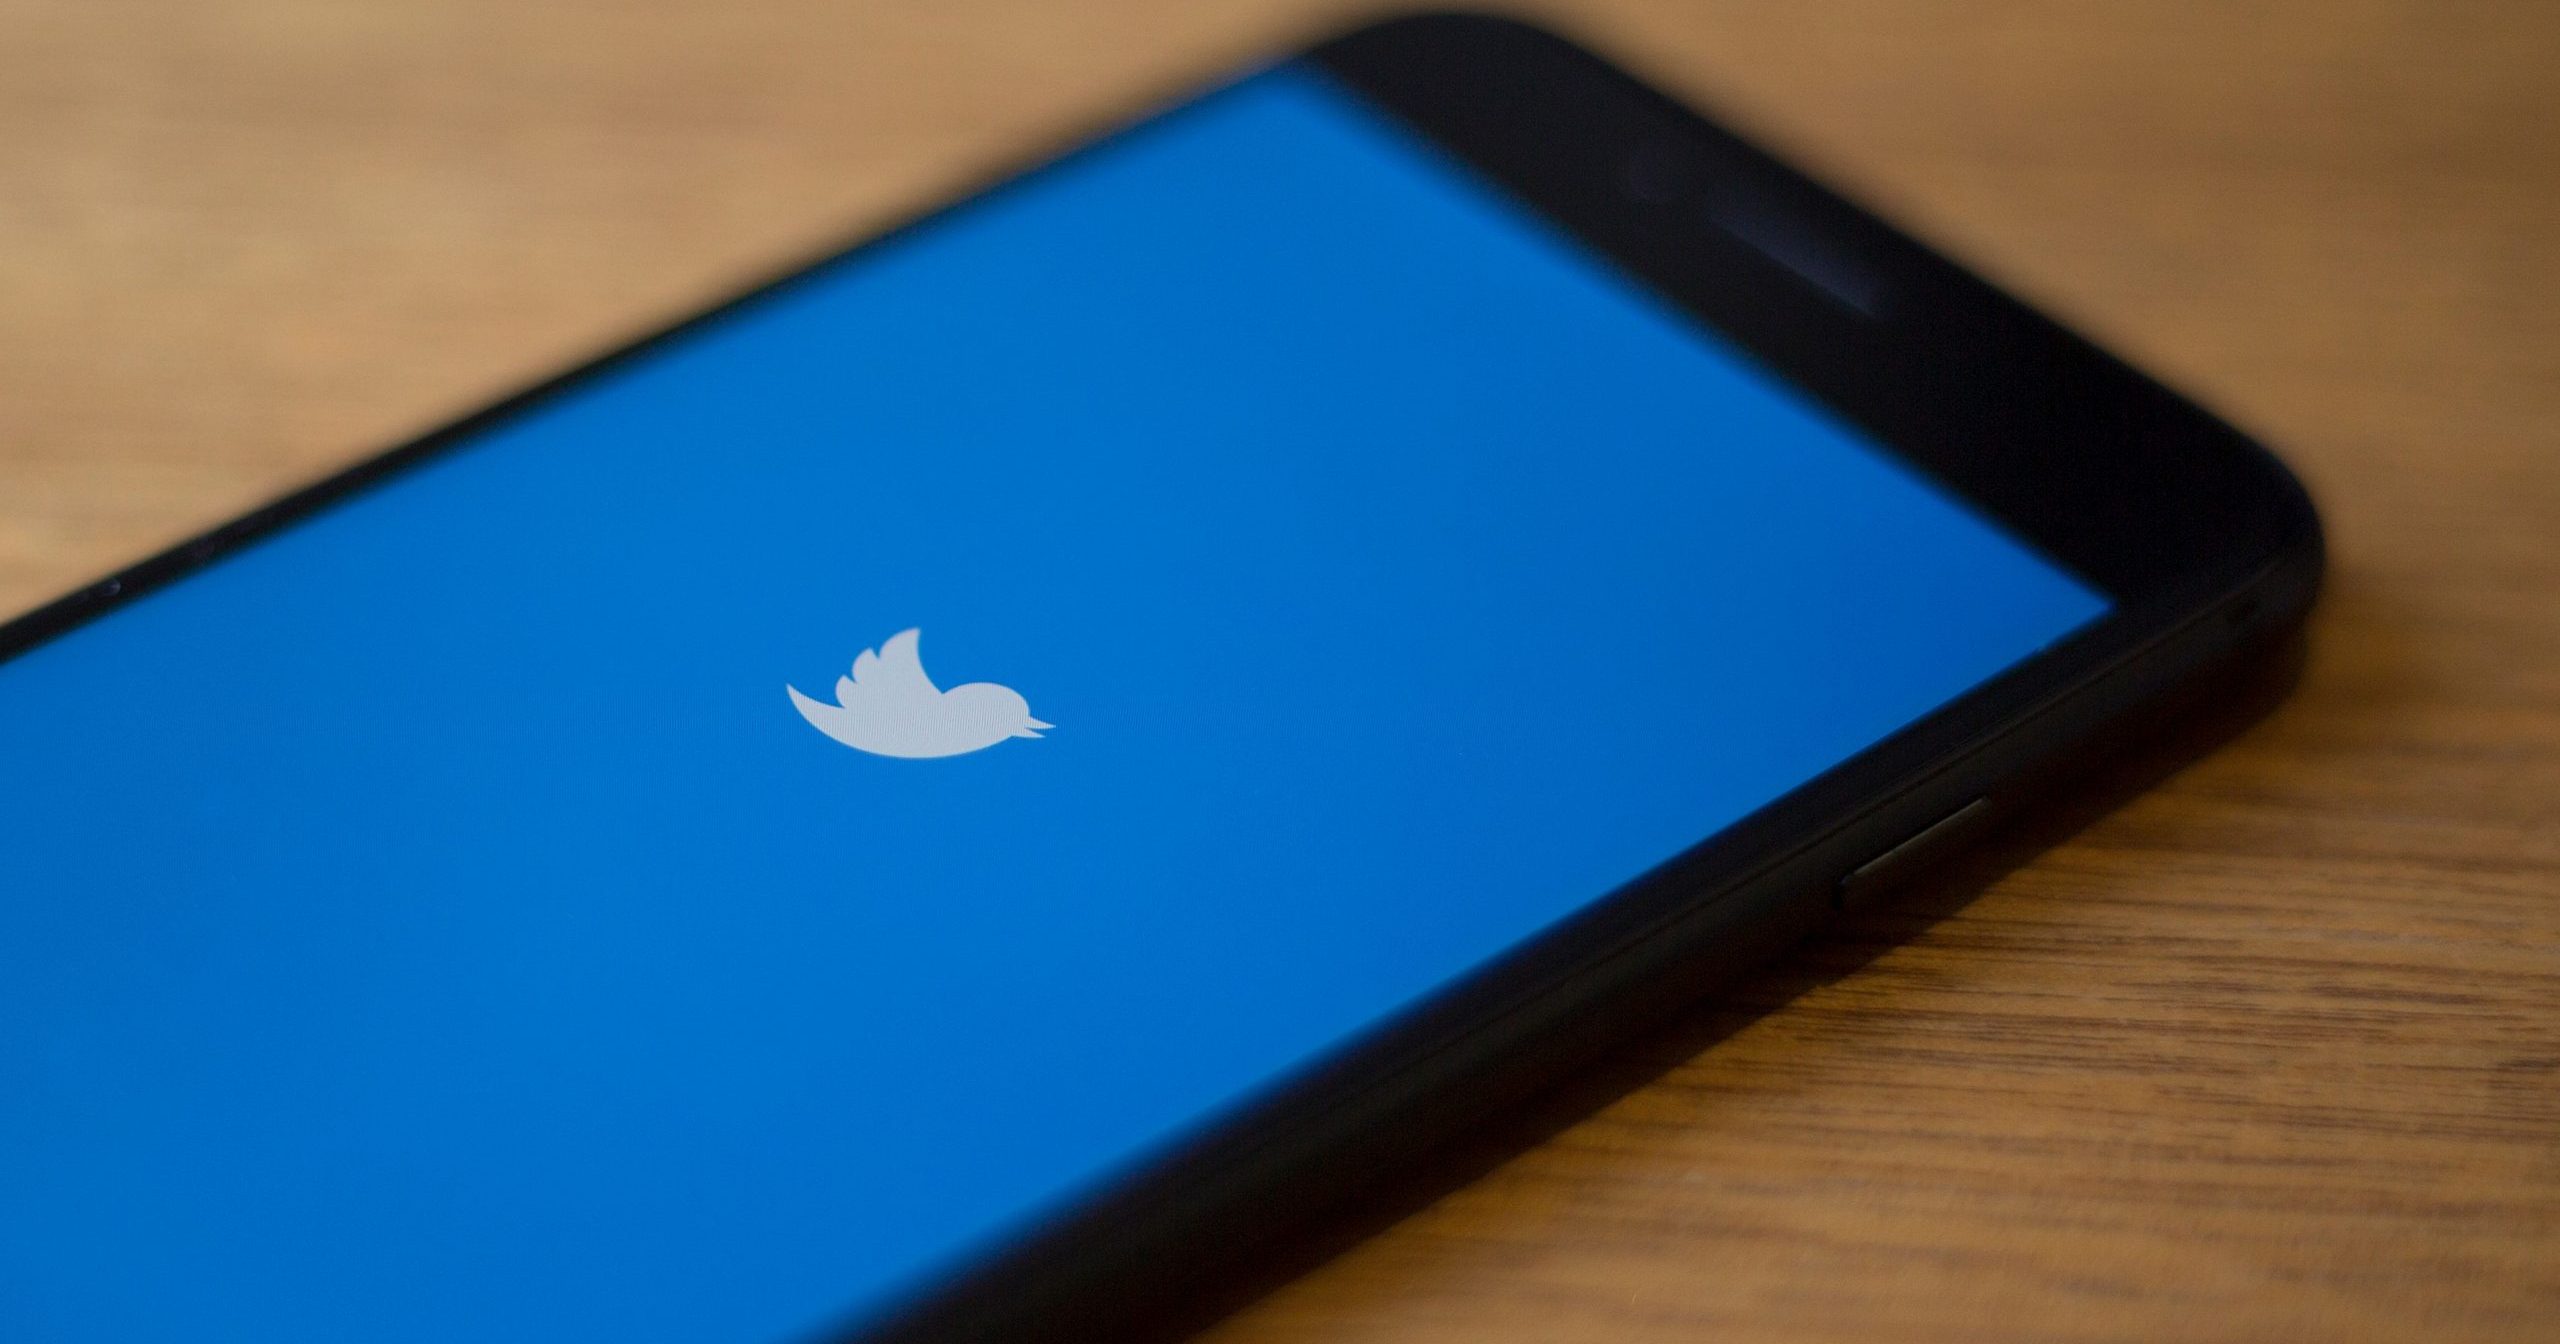 The Twitter logo is seen on a phone in this photo illustration in Washington, D.C., on July 10, 2019. (